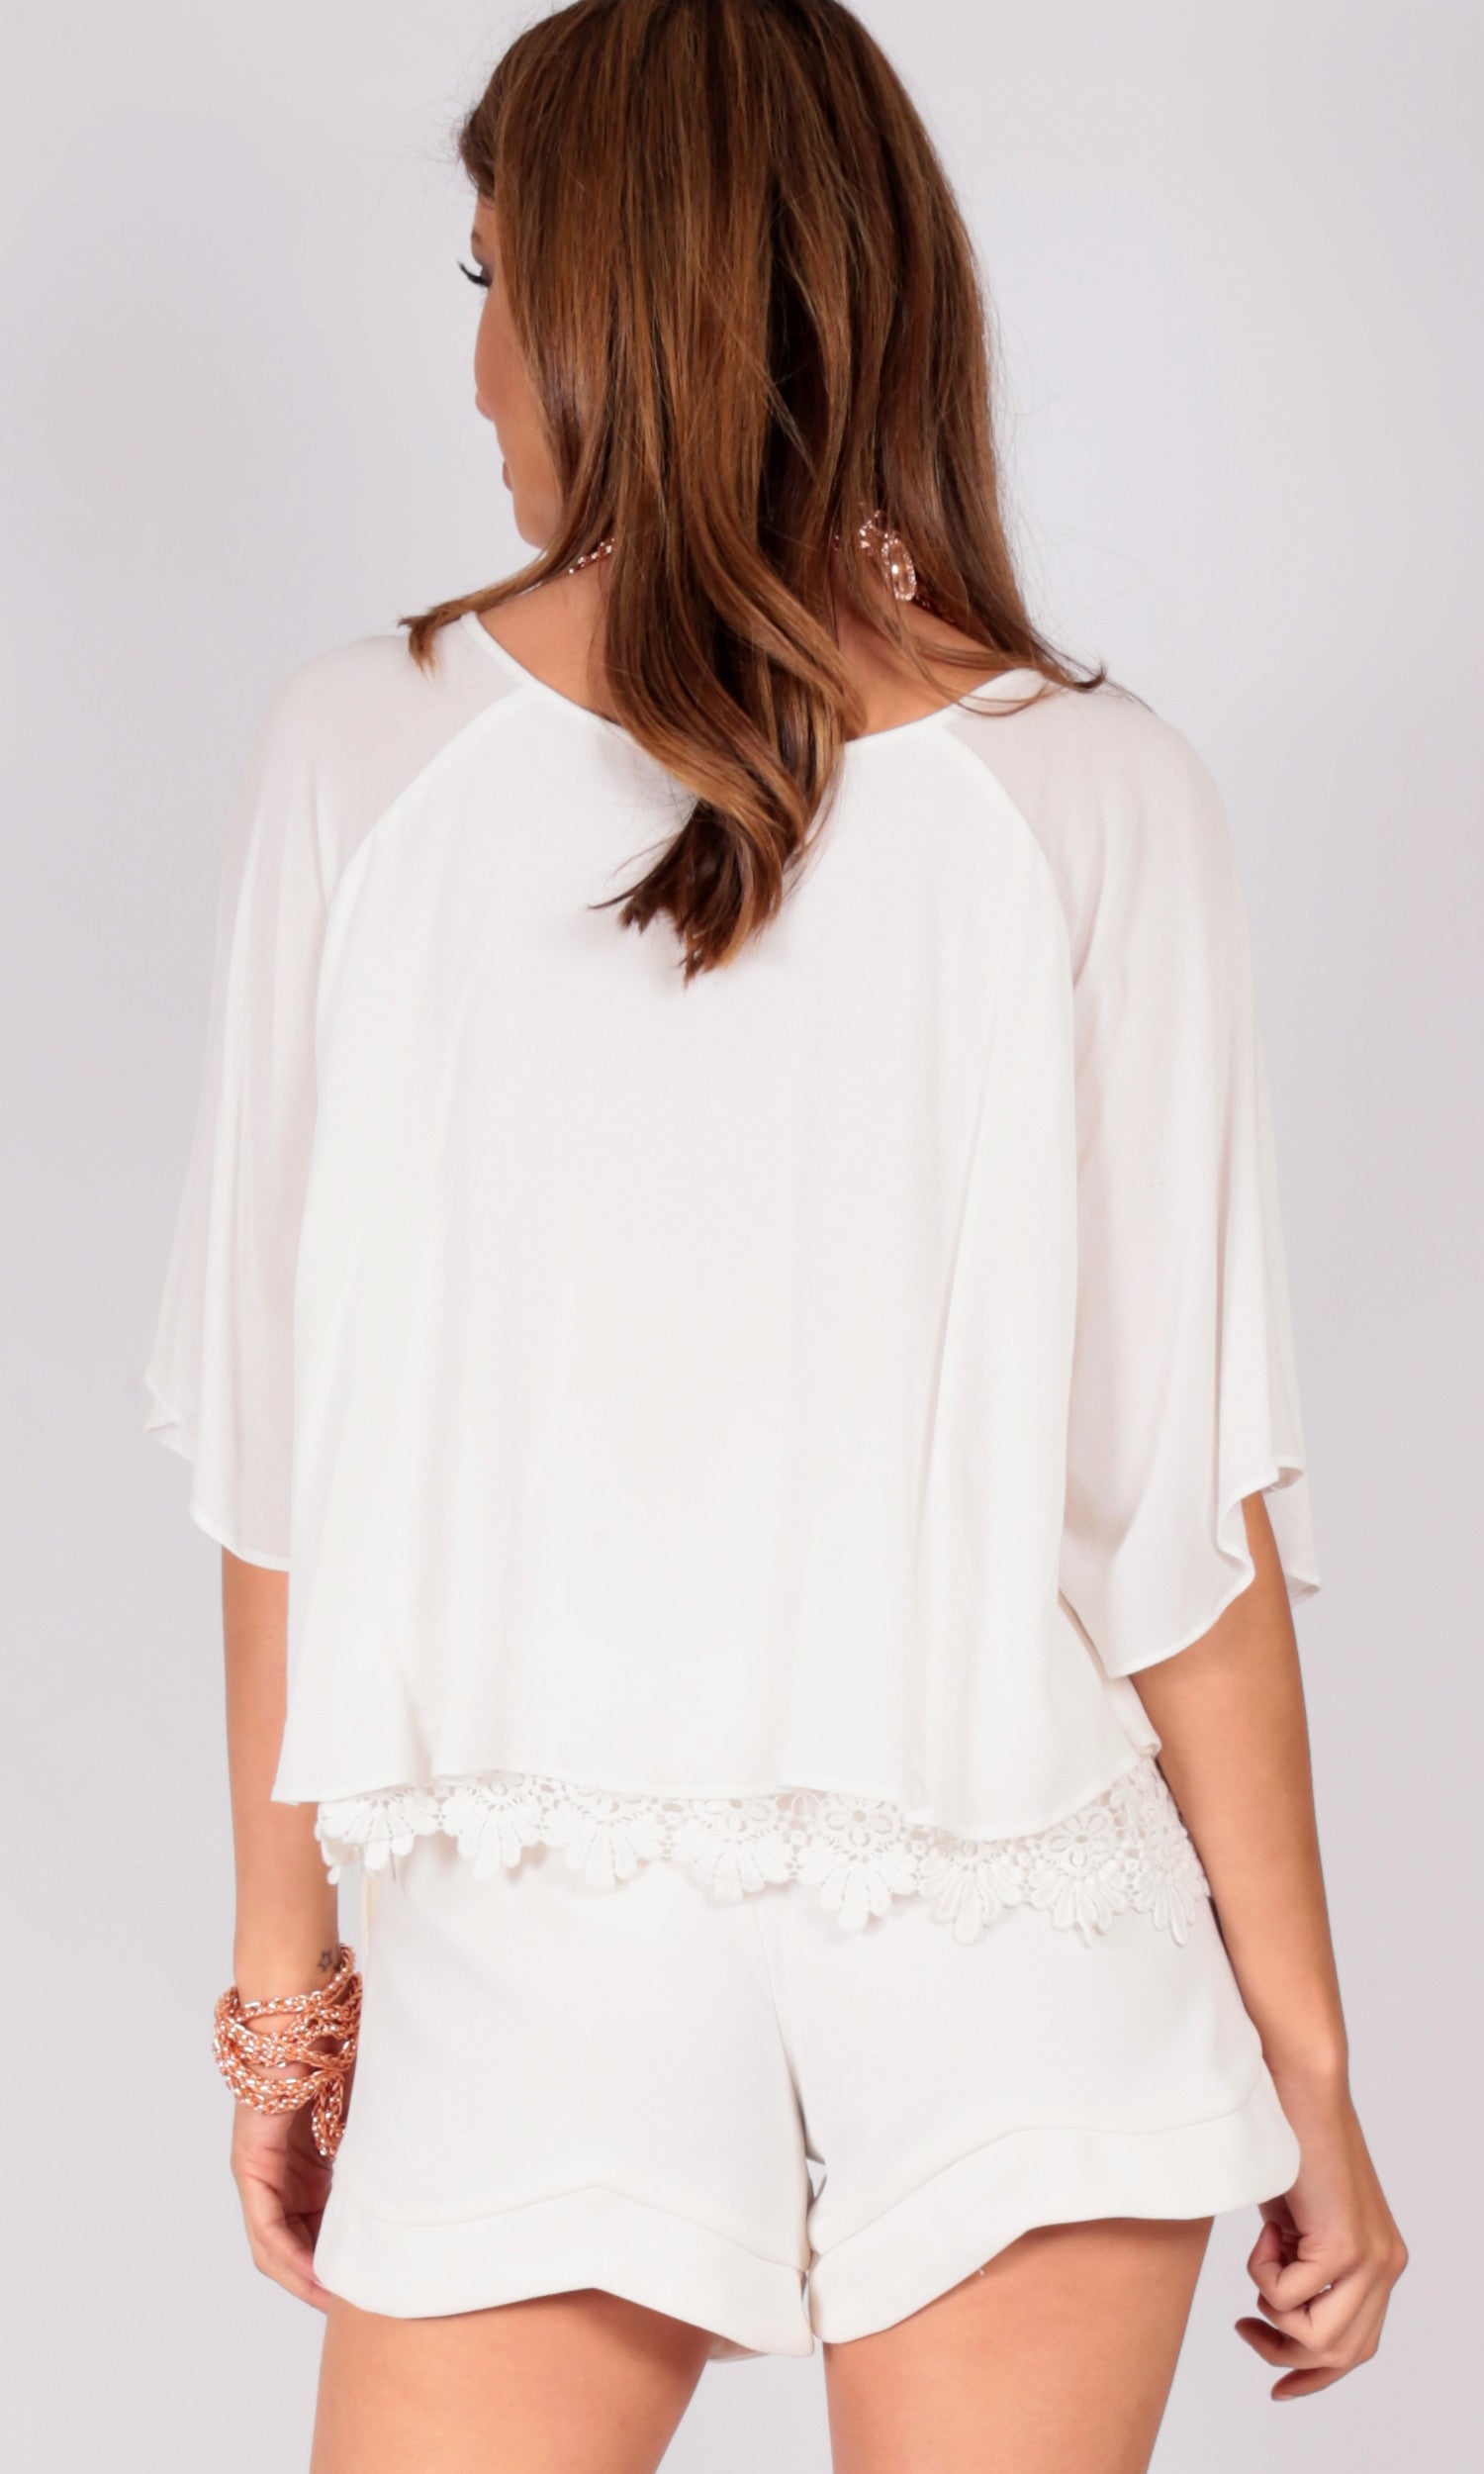 Bat Wing Shirt with Tassel Tie and Lace Detail